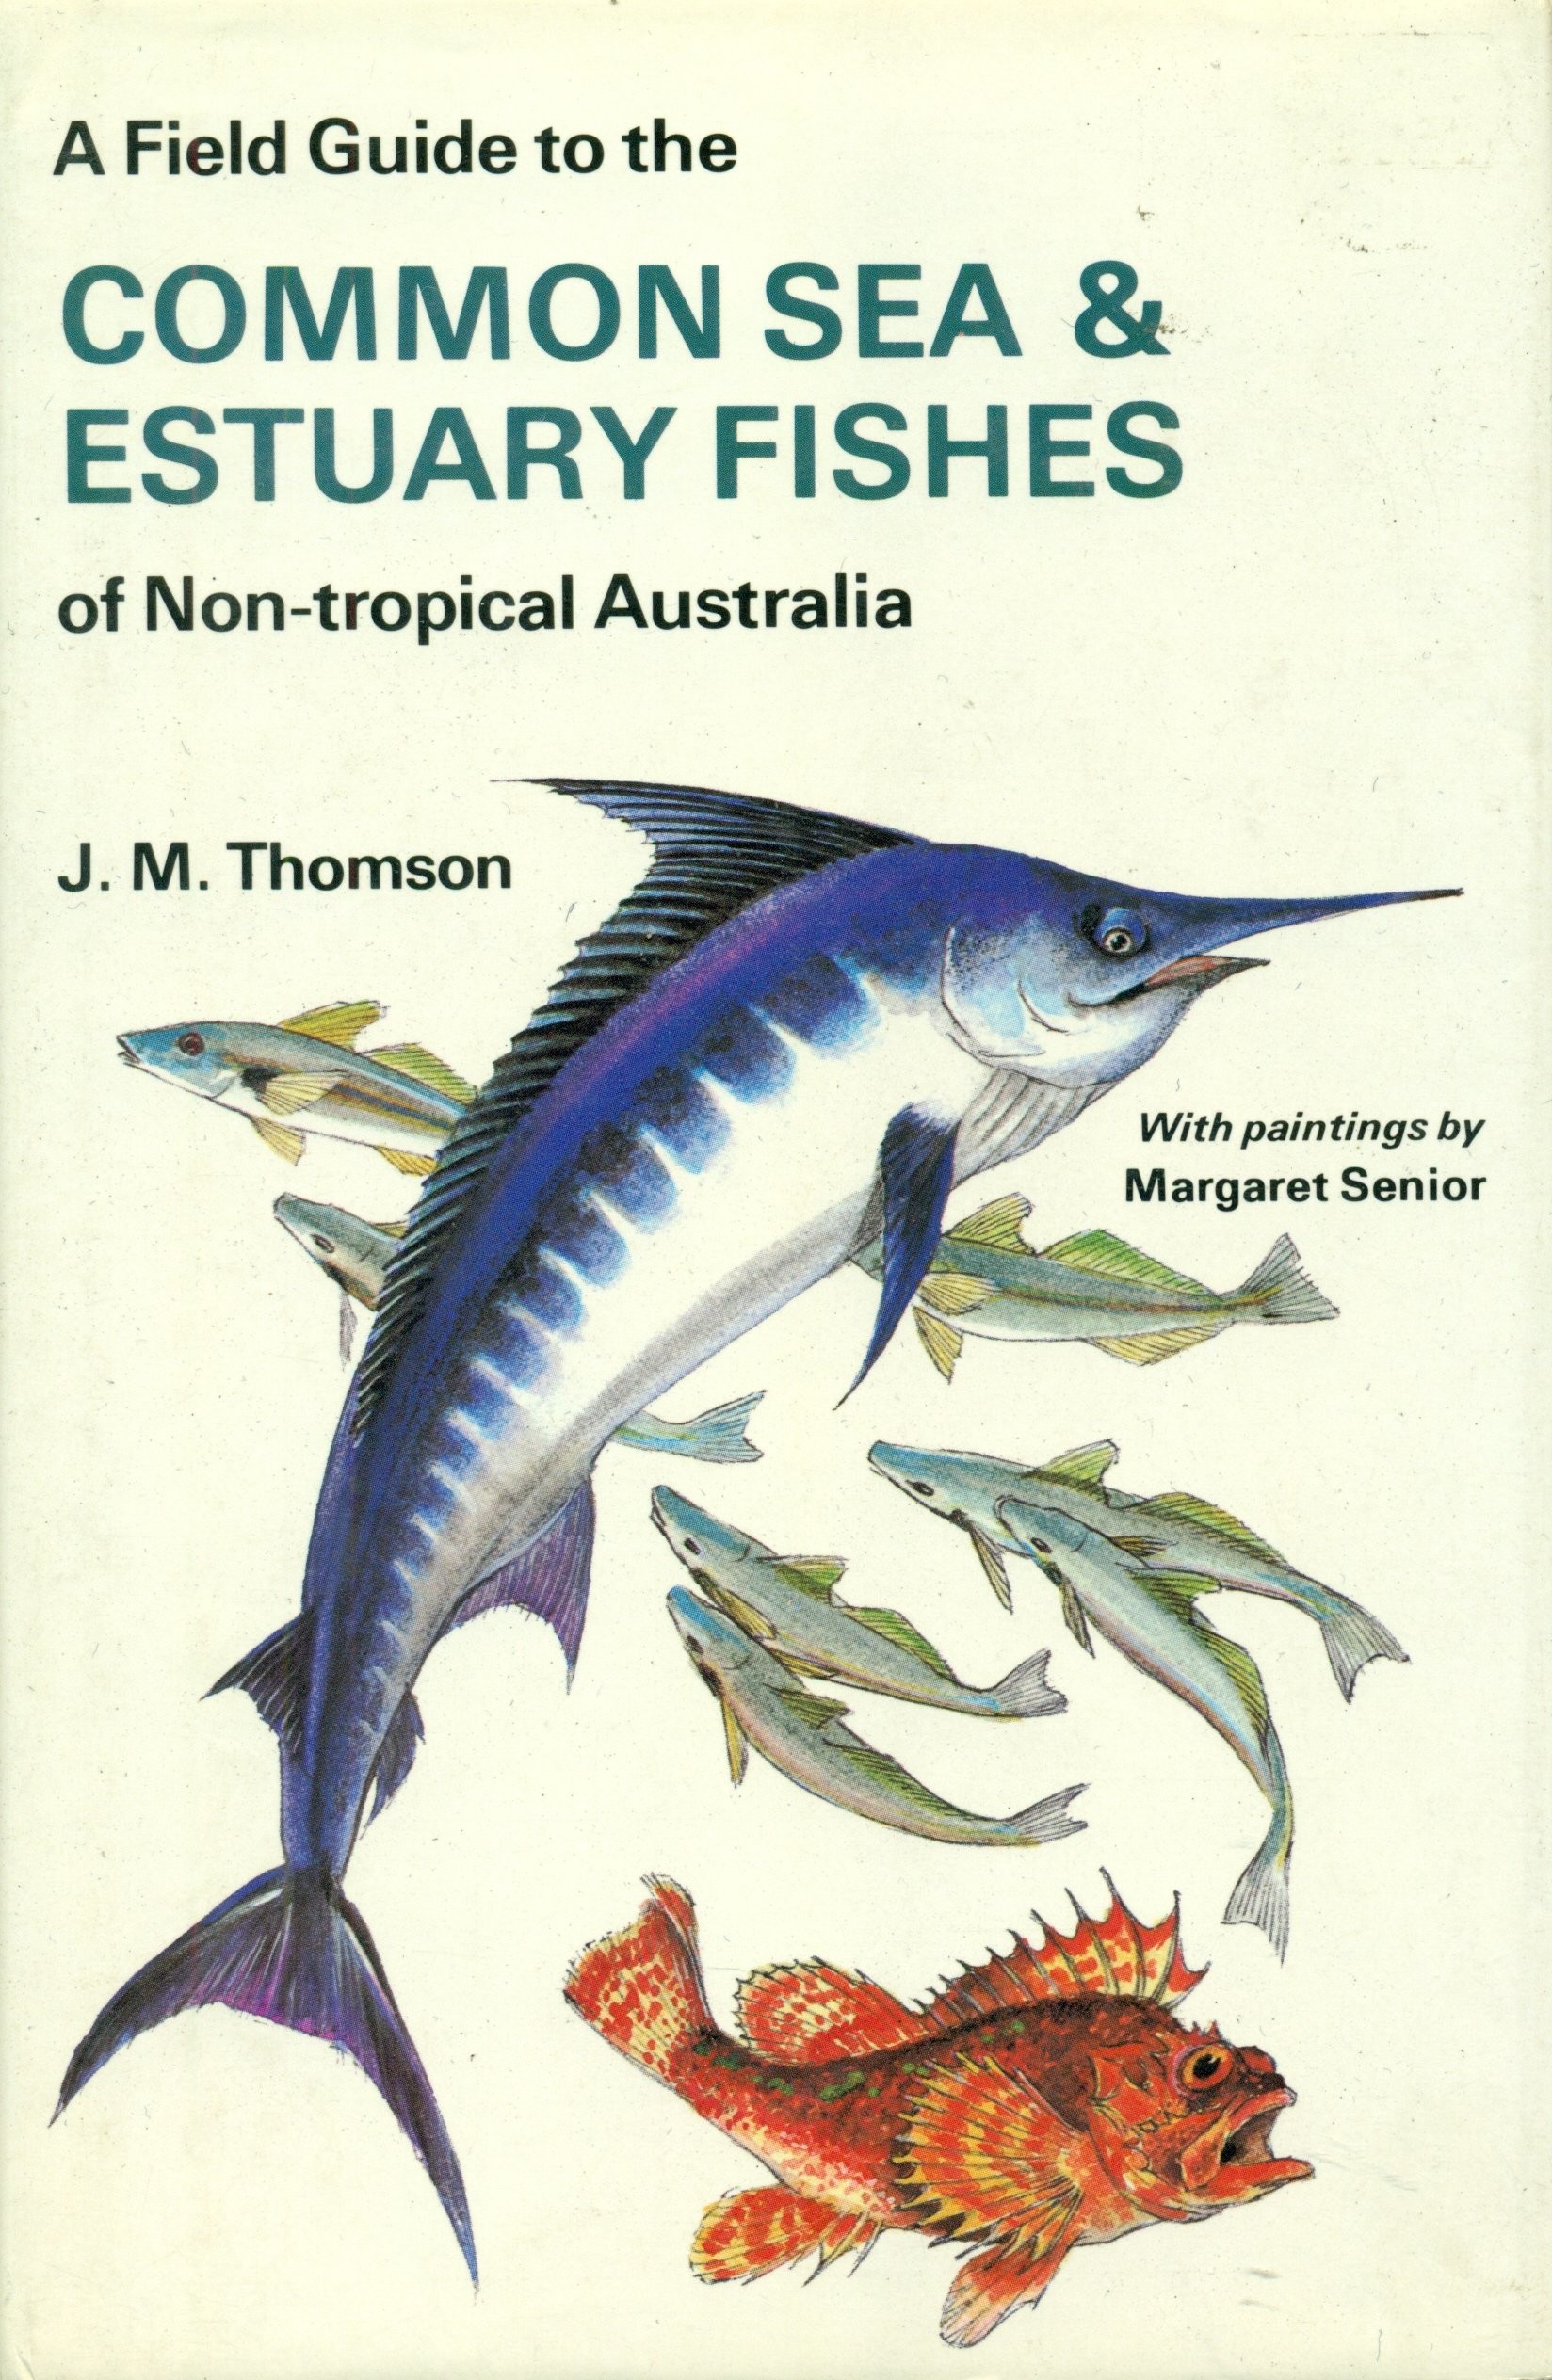 J. M. Thomson: A Field Guide to the Common Sea & Estuary Fishes of Non-tropical Australia (Rippl-Rónai Múzeum CC BY-NC-ND)